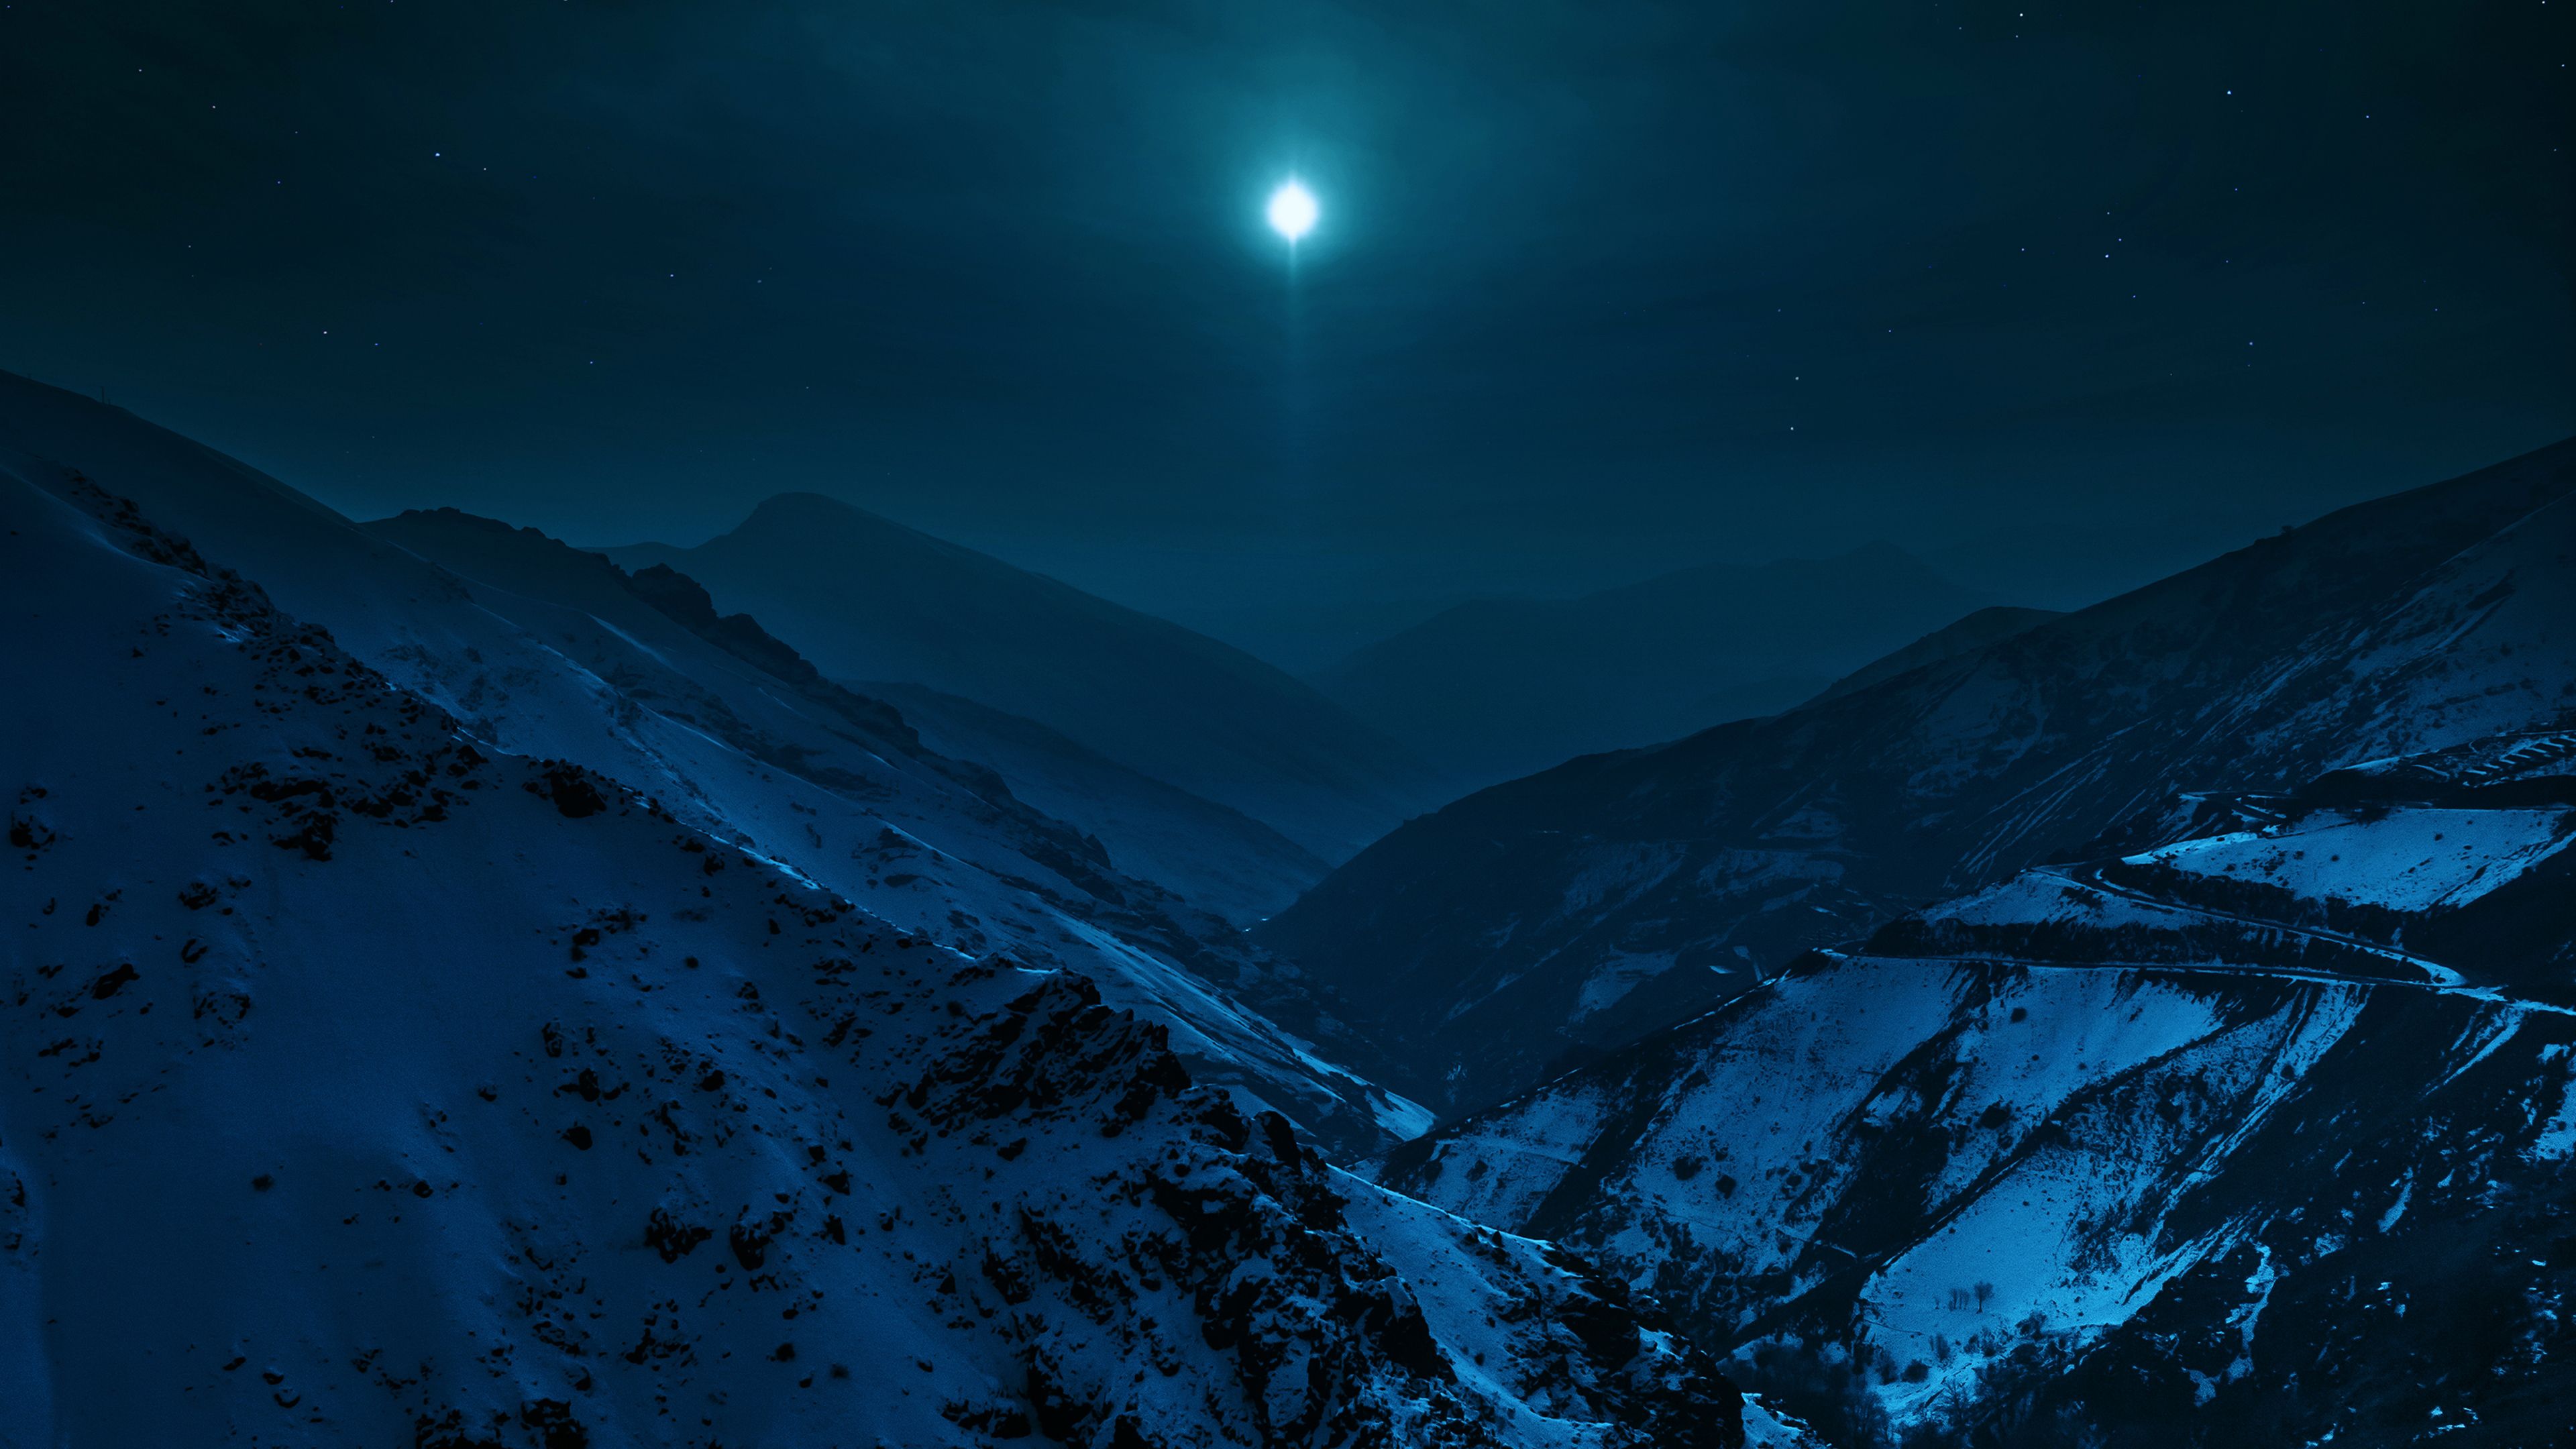 Snow Covered Mountain With Background Of Dark Sky And Moon During Nighttime 4K HD Nature Wallpaper